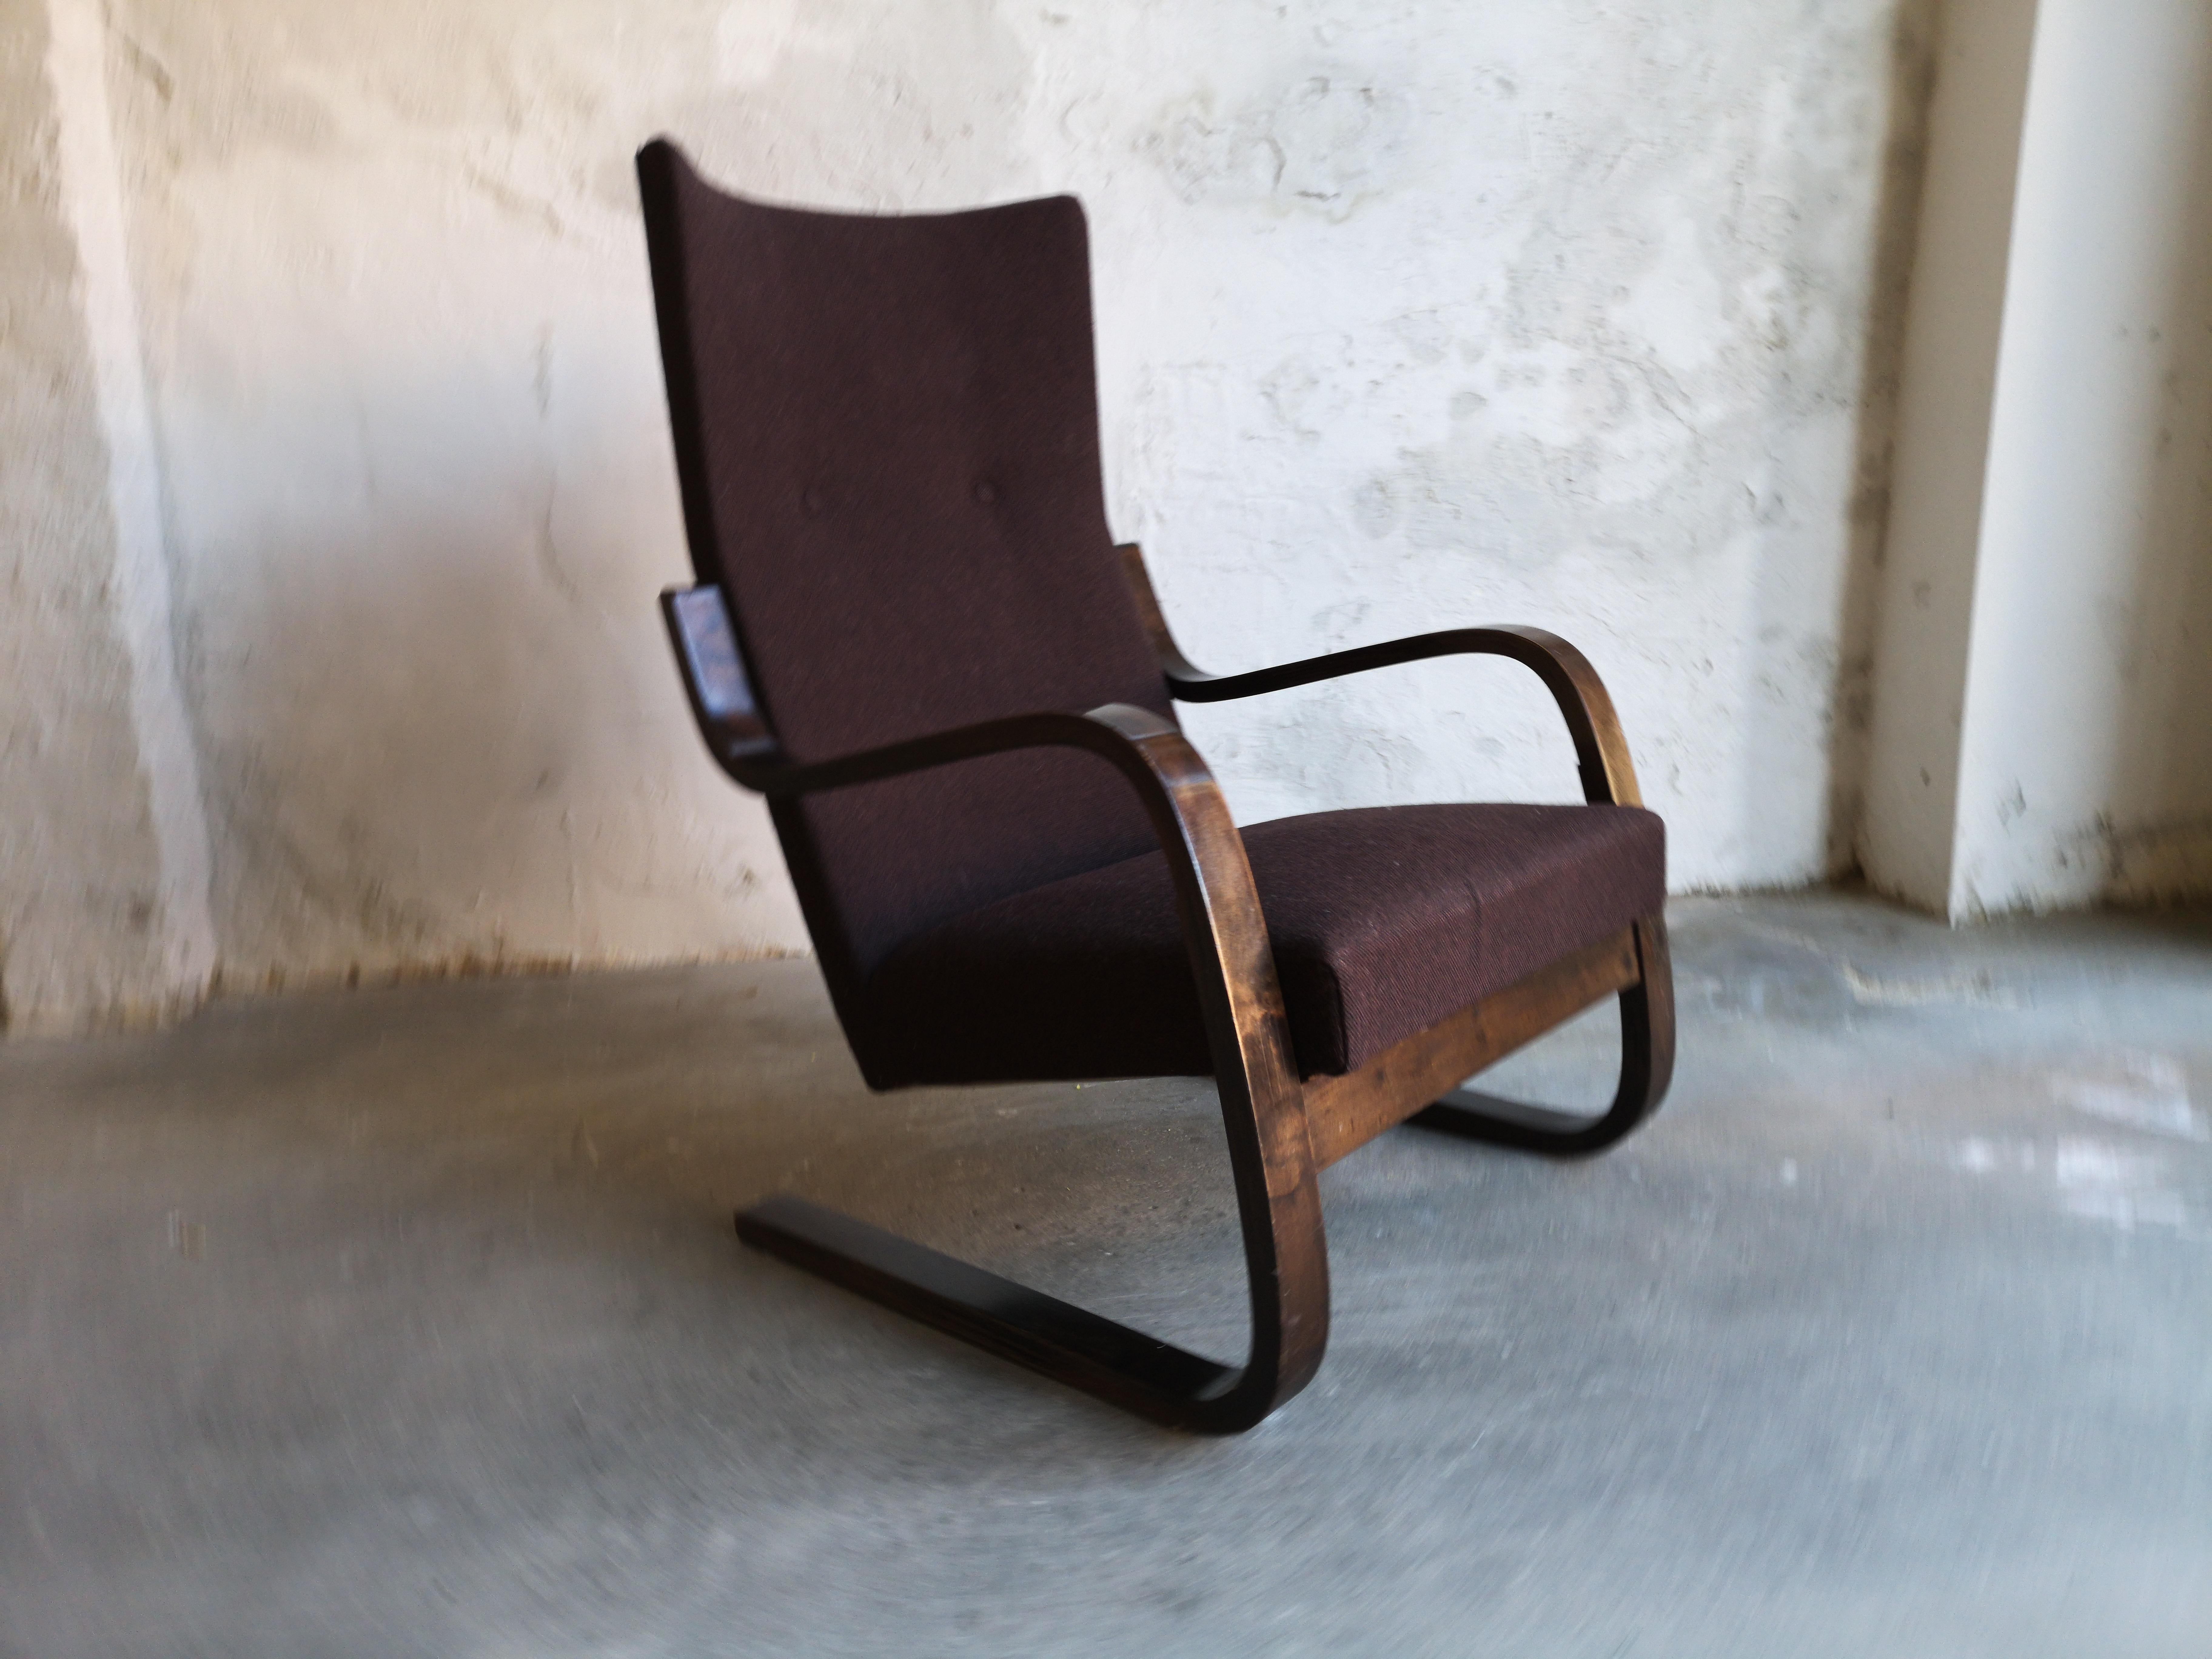 A rare early 1930s Alvar Aalto cantilever chair 401 just as he introduced it to the world at the 1933 Milan Triennal. Later versions added 'ears' on the sides of the backrest. The chair has been fully refurbished a few years ago and it is in